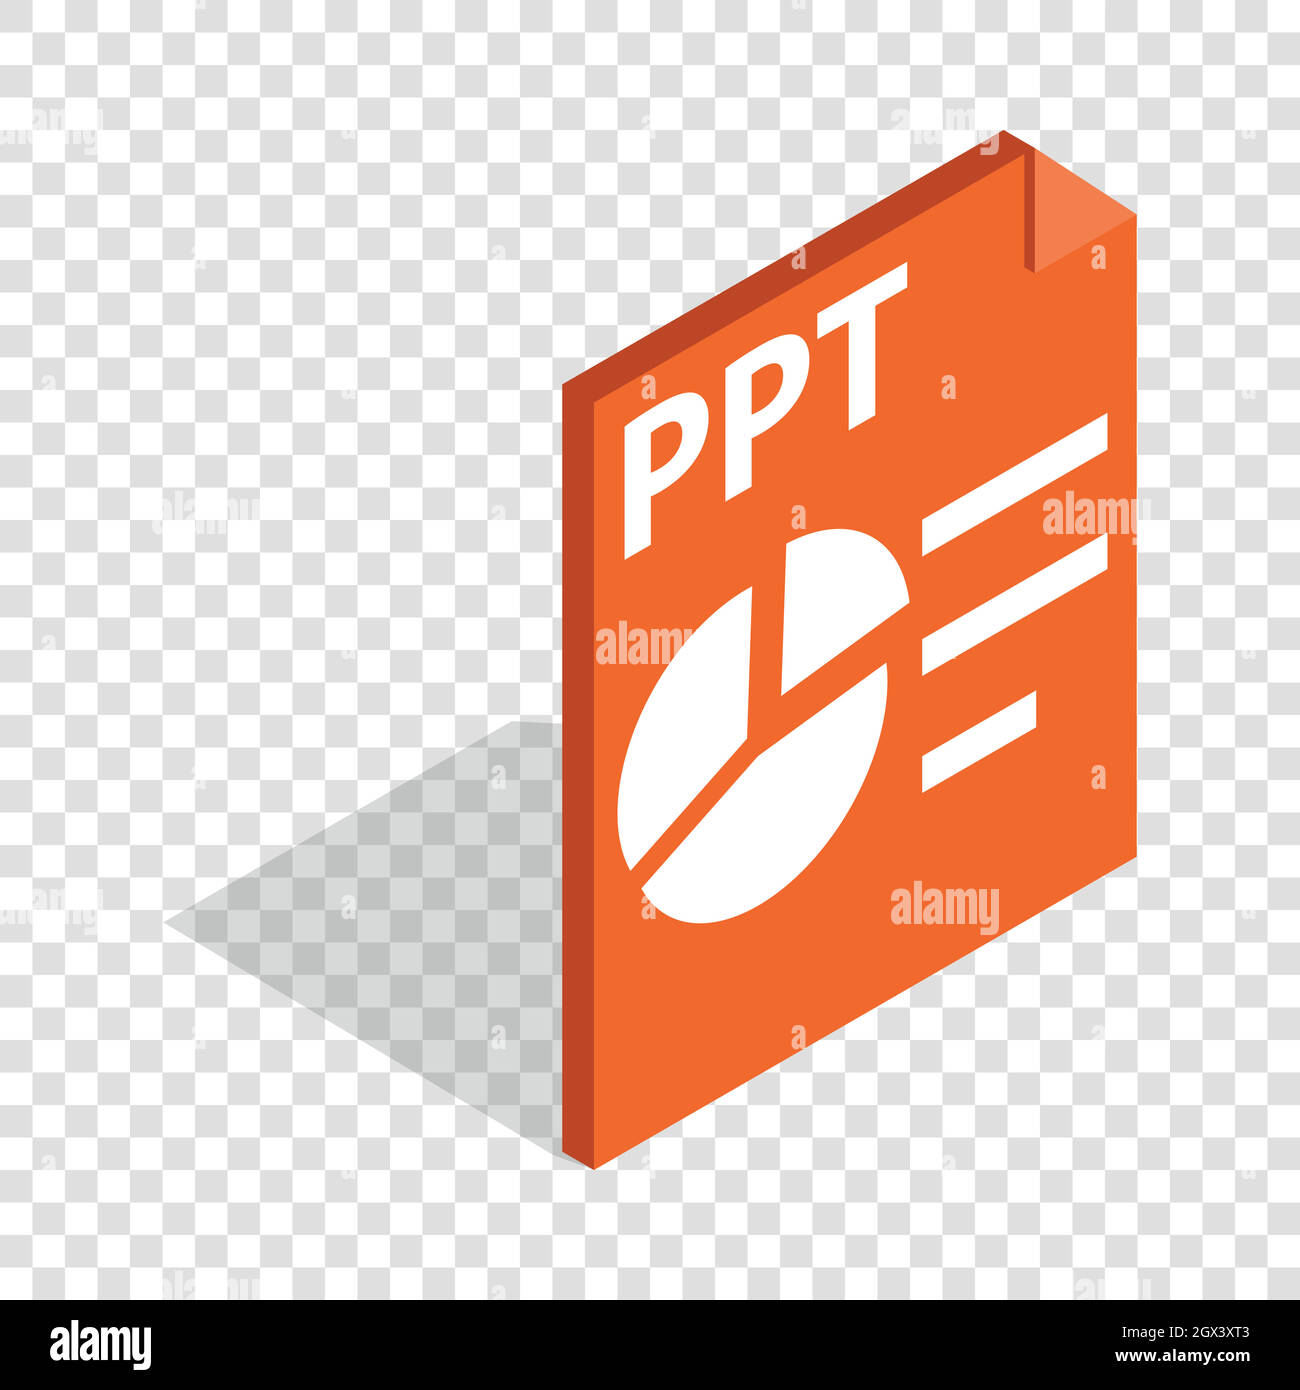 PPT file extension isometric icon Stock Vector